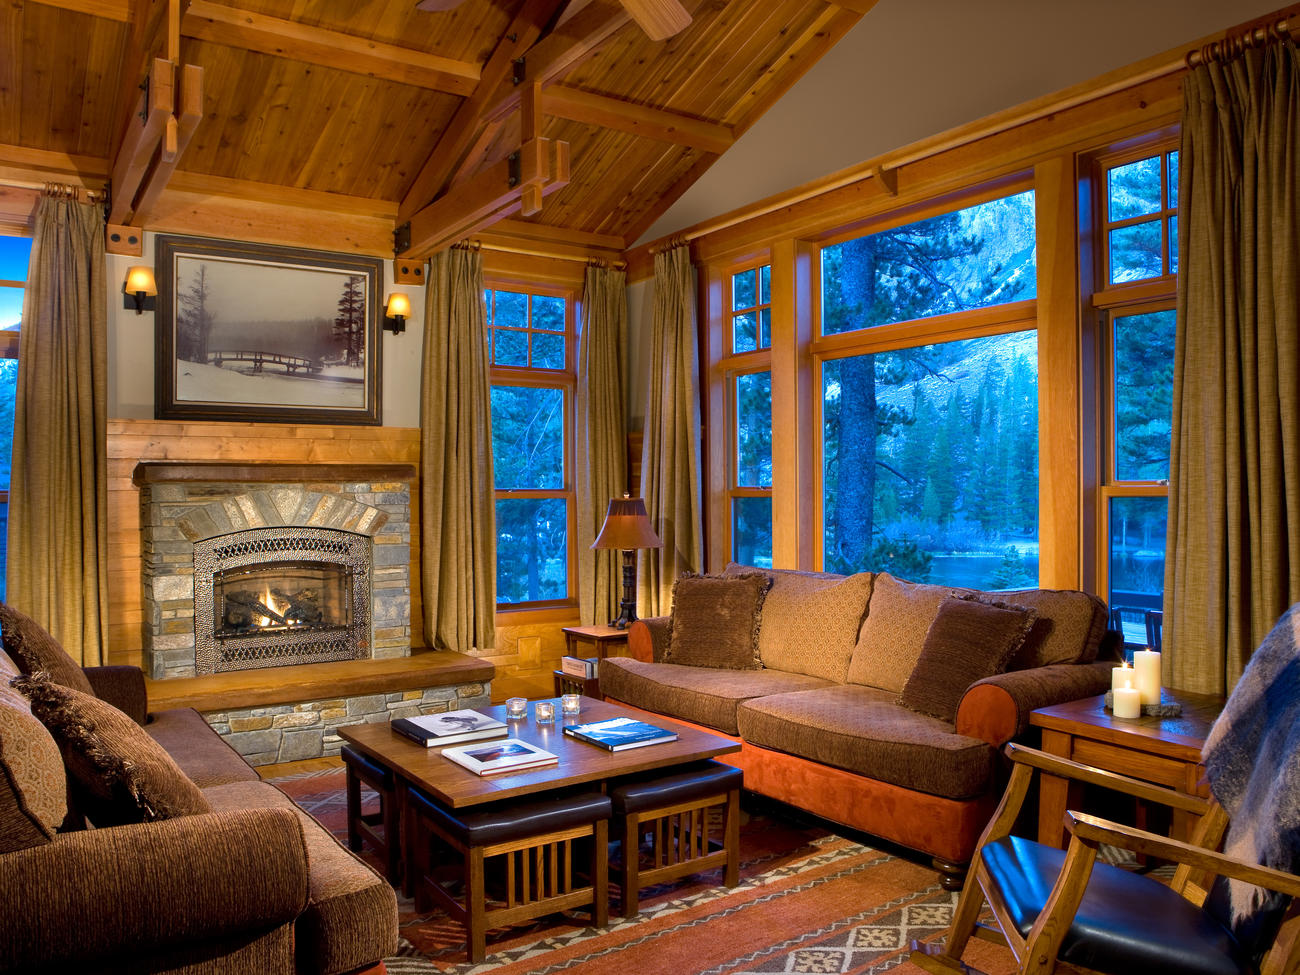 Inside the cozy cabins at Tamarack Lodge